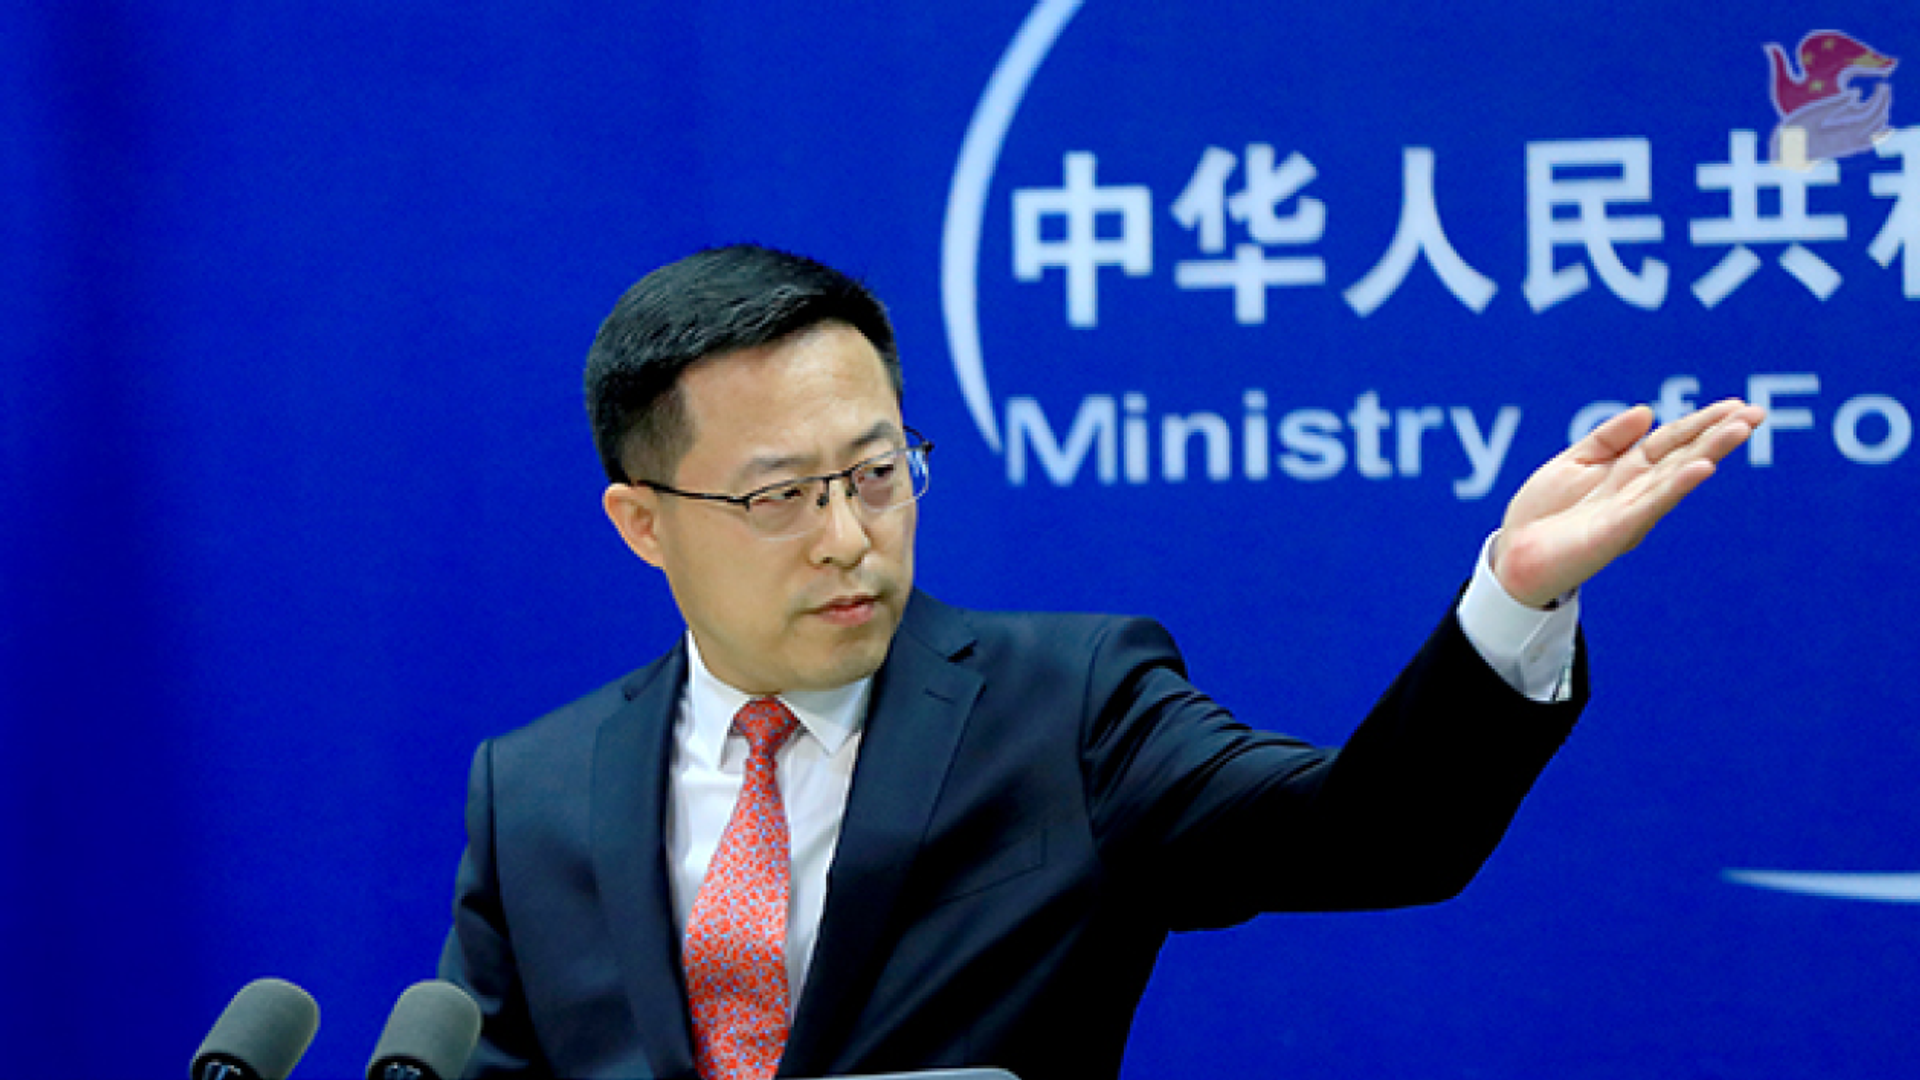 Chinese Foreign Ministry spokesperson Zhao Lijian answers press questions at an April 7, 2022, press conference. - Sputnik International, 1920, 06.07.2022